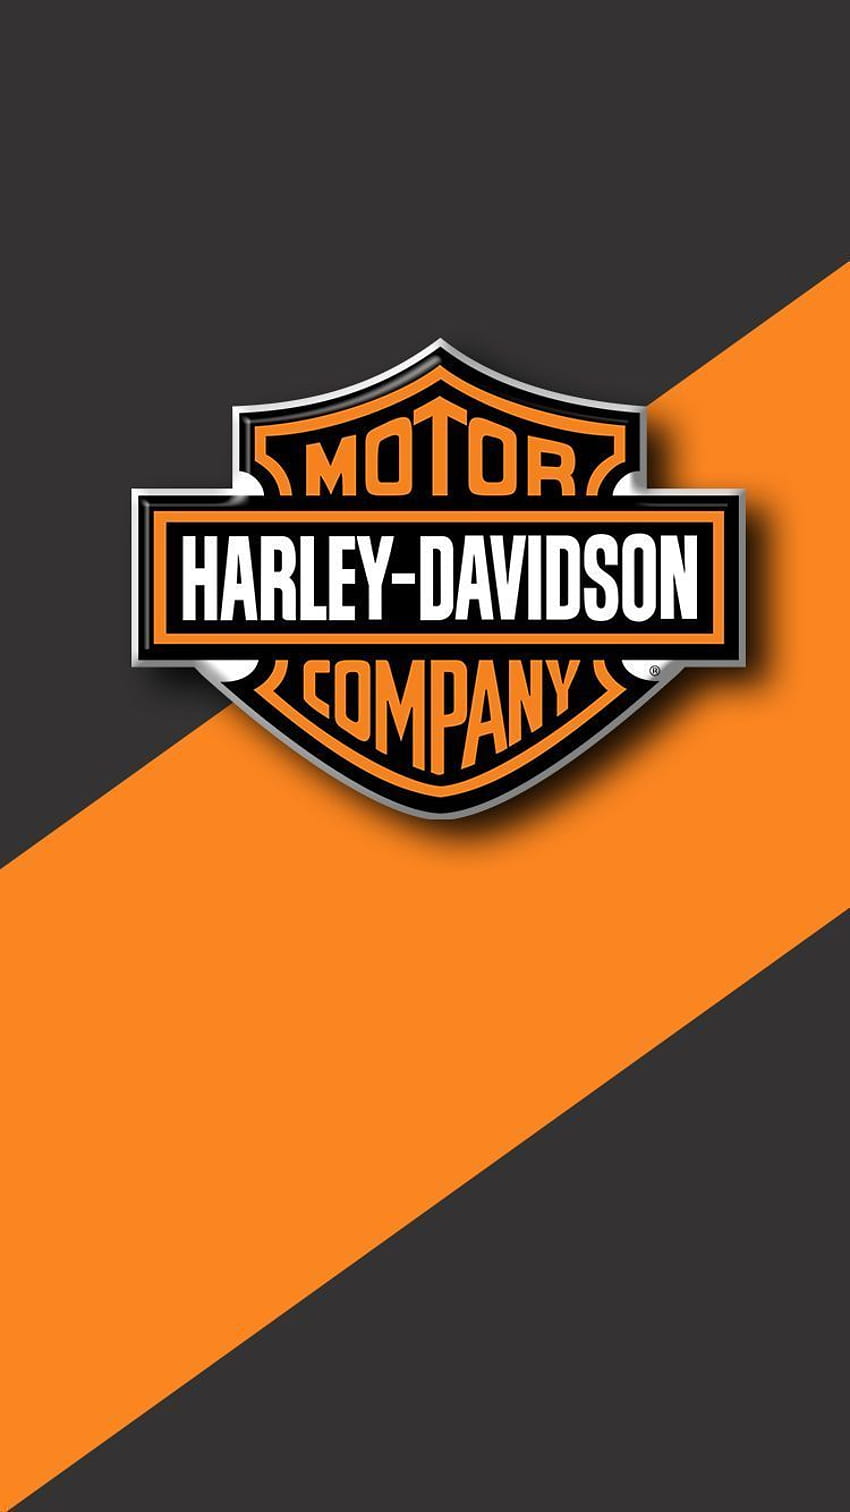 Harley davidson for phone HD wallpapers